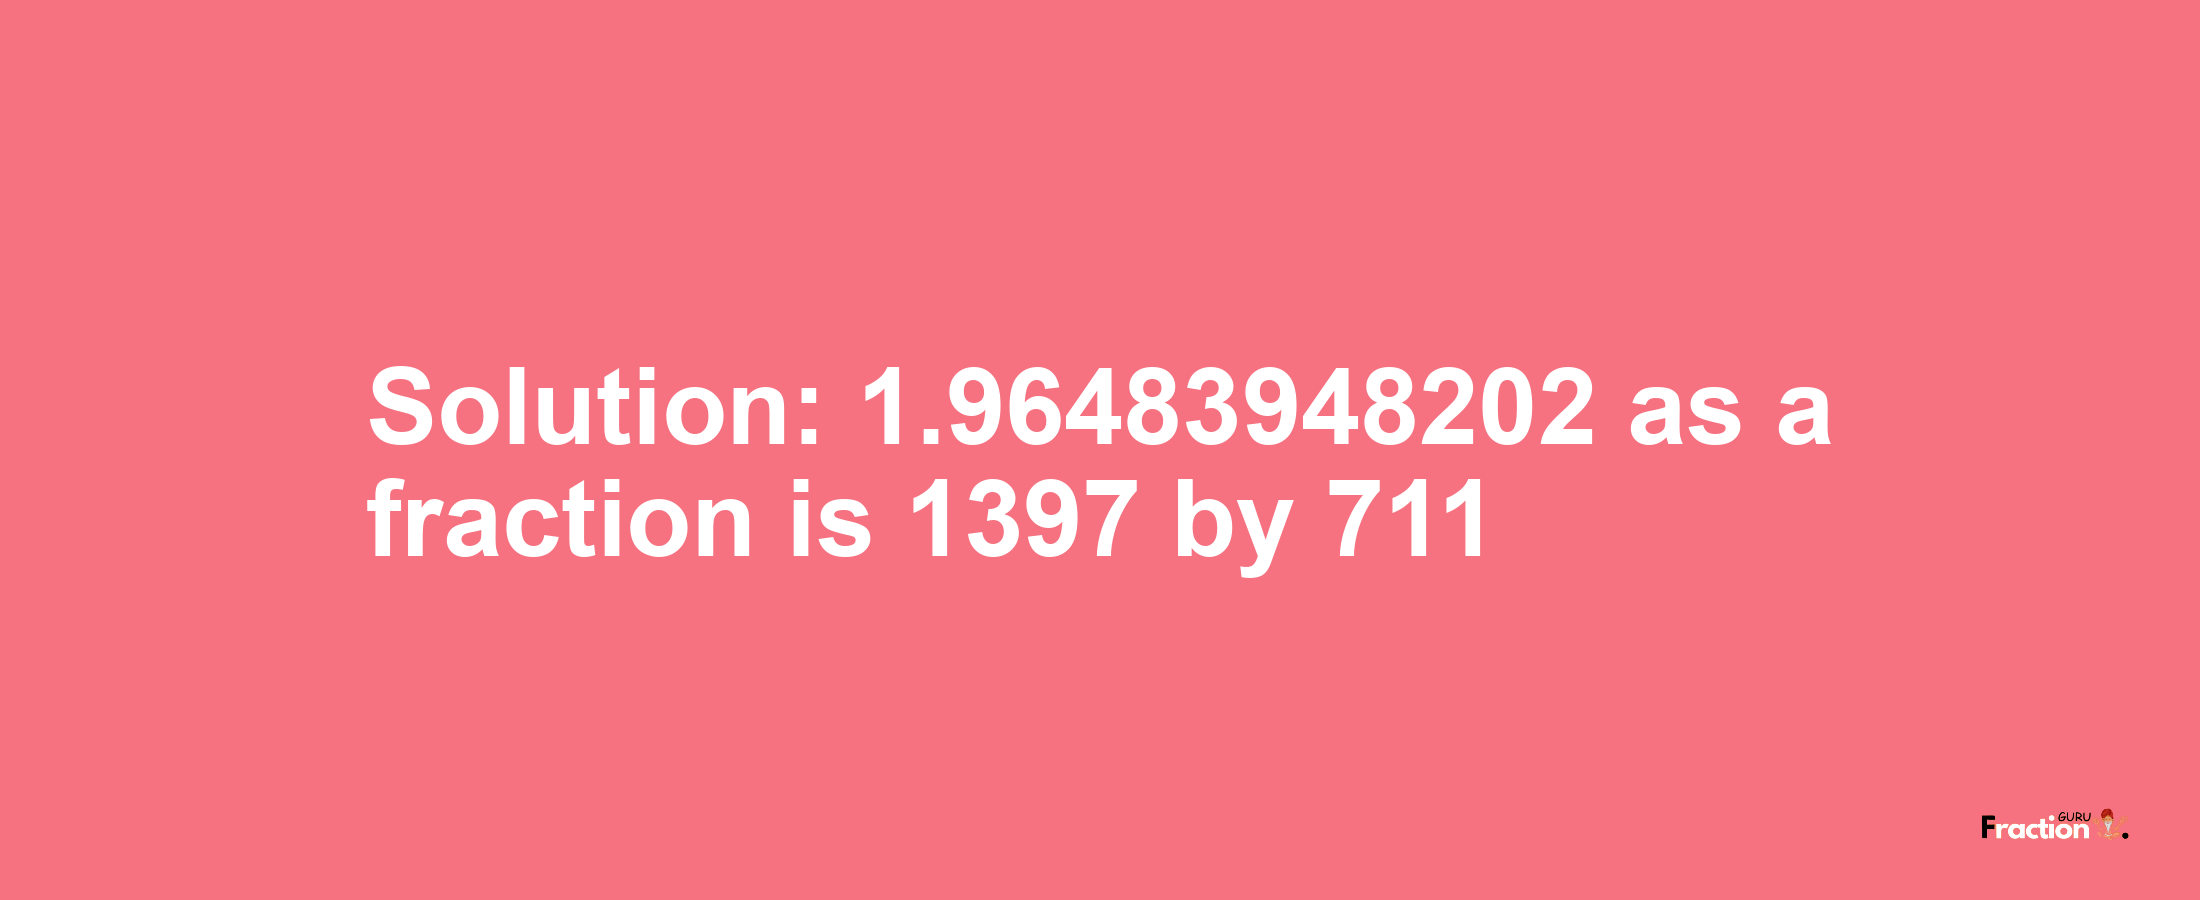 Solution:1.96483948202 as a fraction is 1397/711